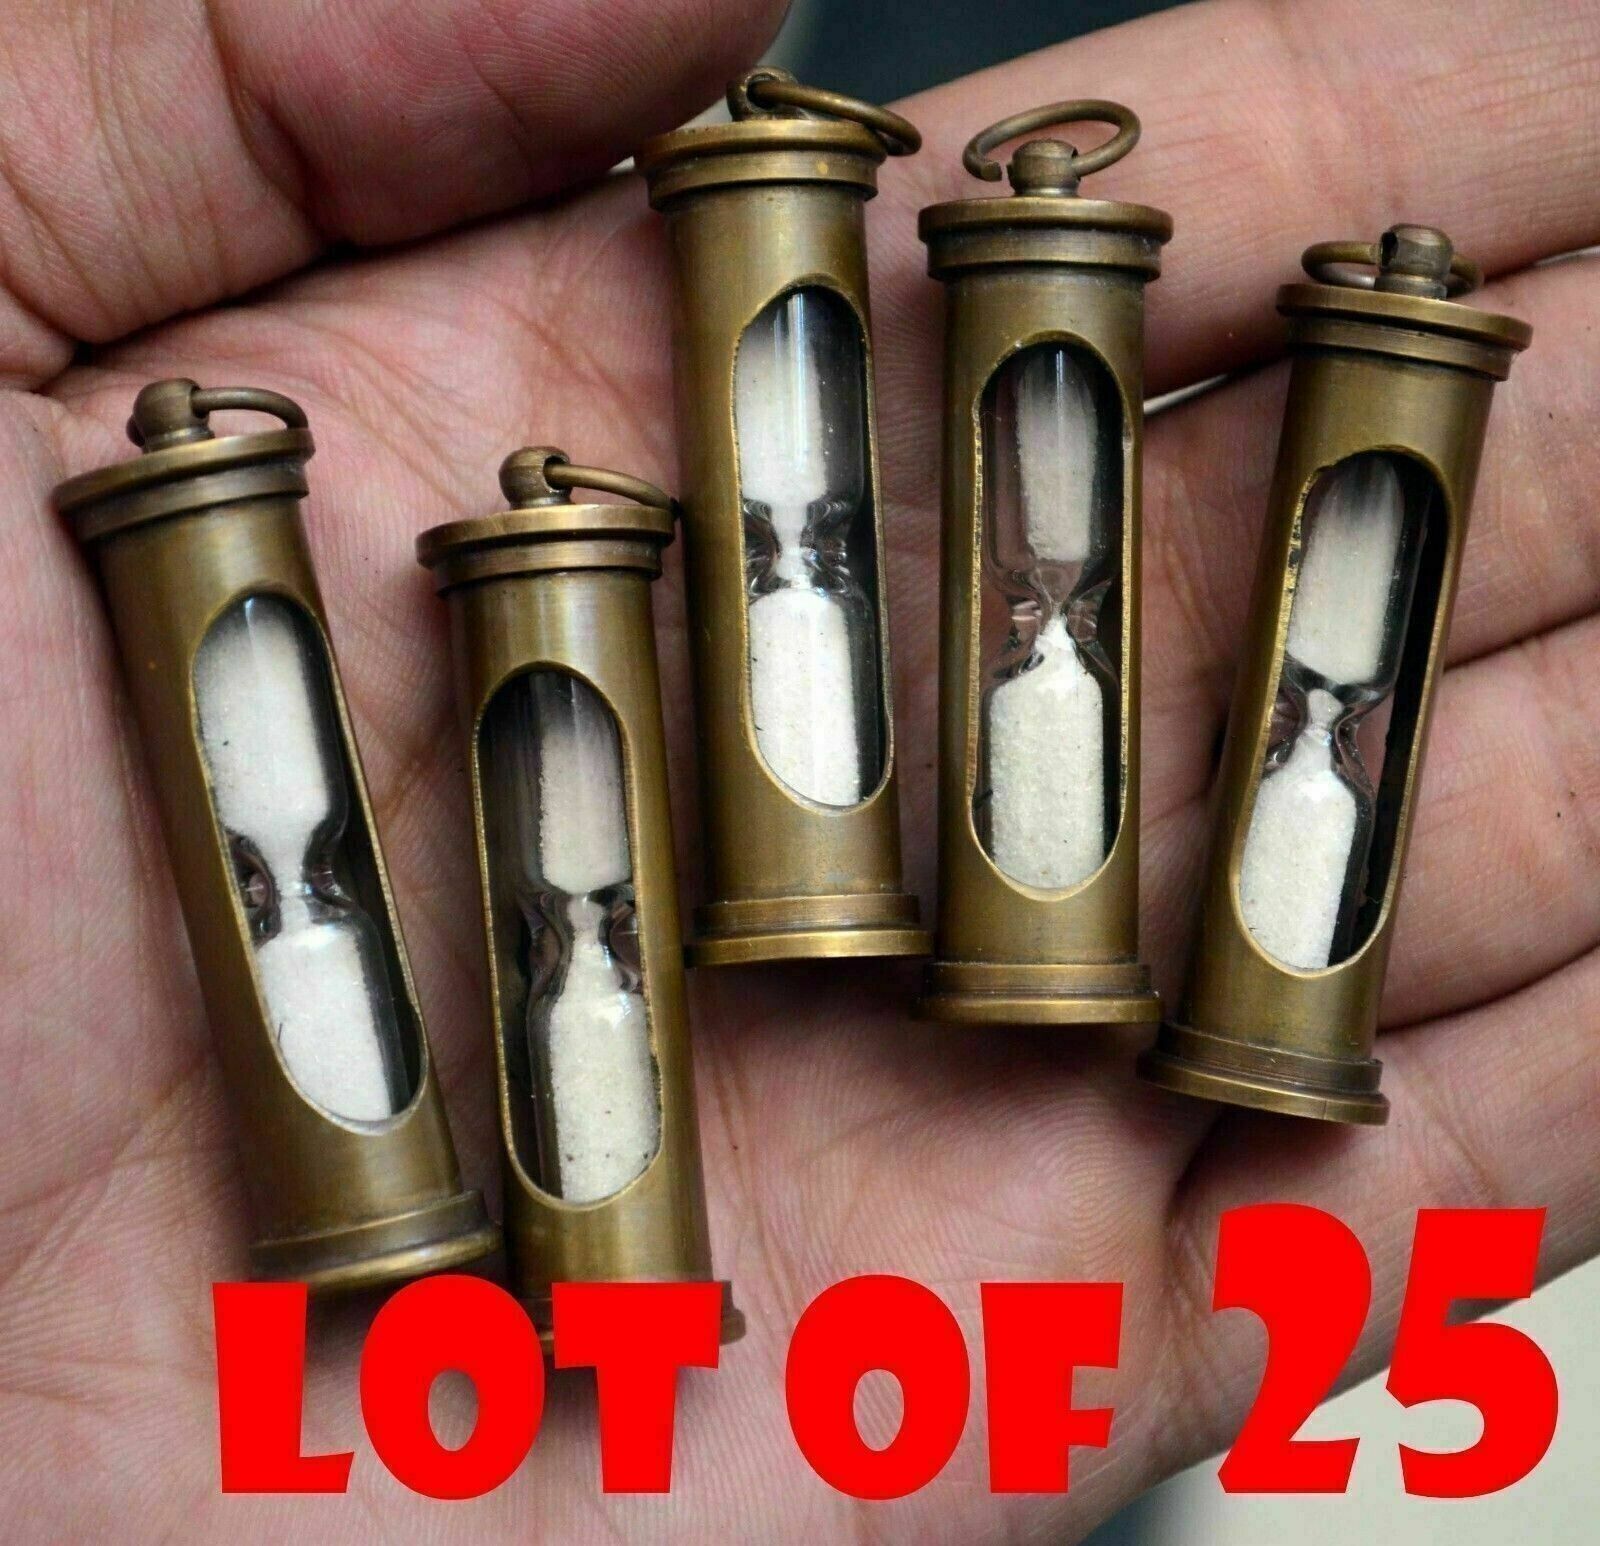 Lot of 25 pc Brown Antique Hourglass Sand Timer Key chain For New Year Gift